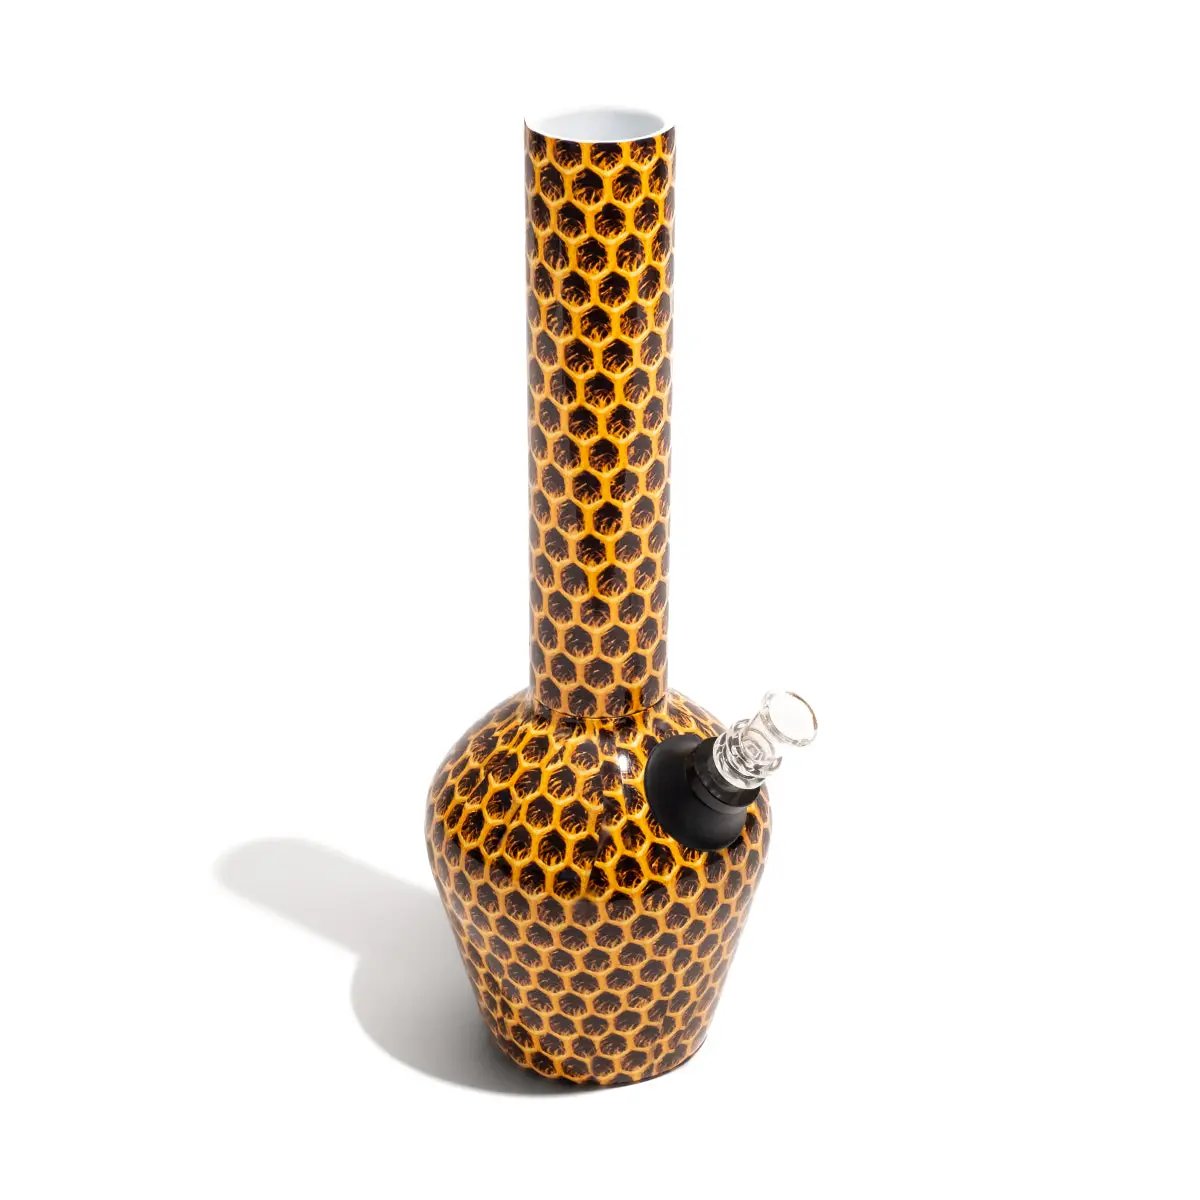 Chill - Limited Edition - Honeycomb by Chill Steel Pipes